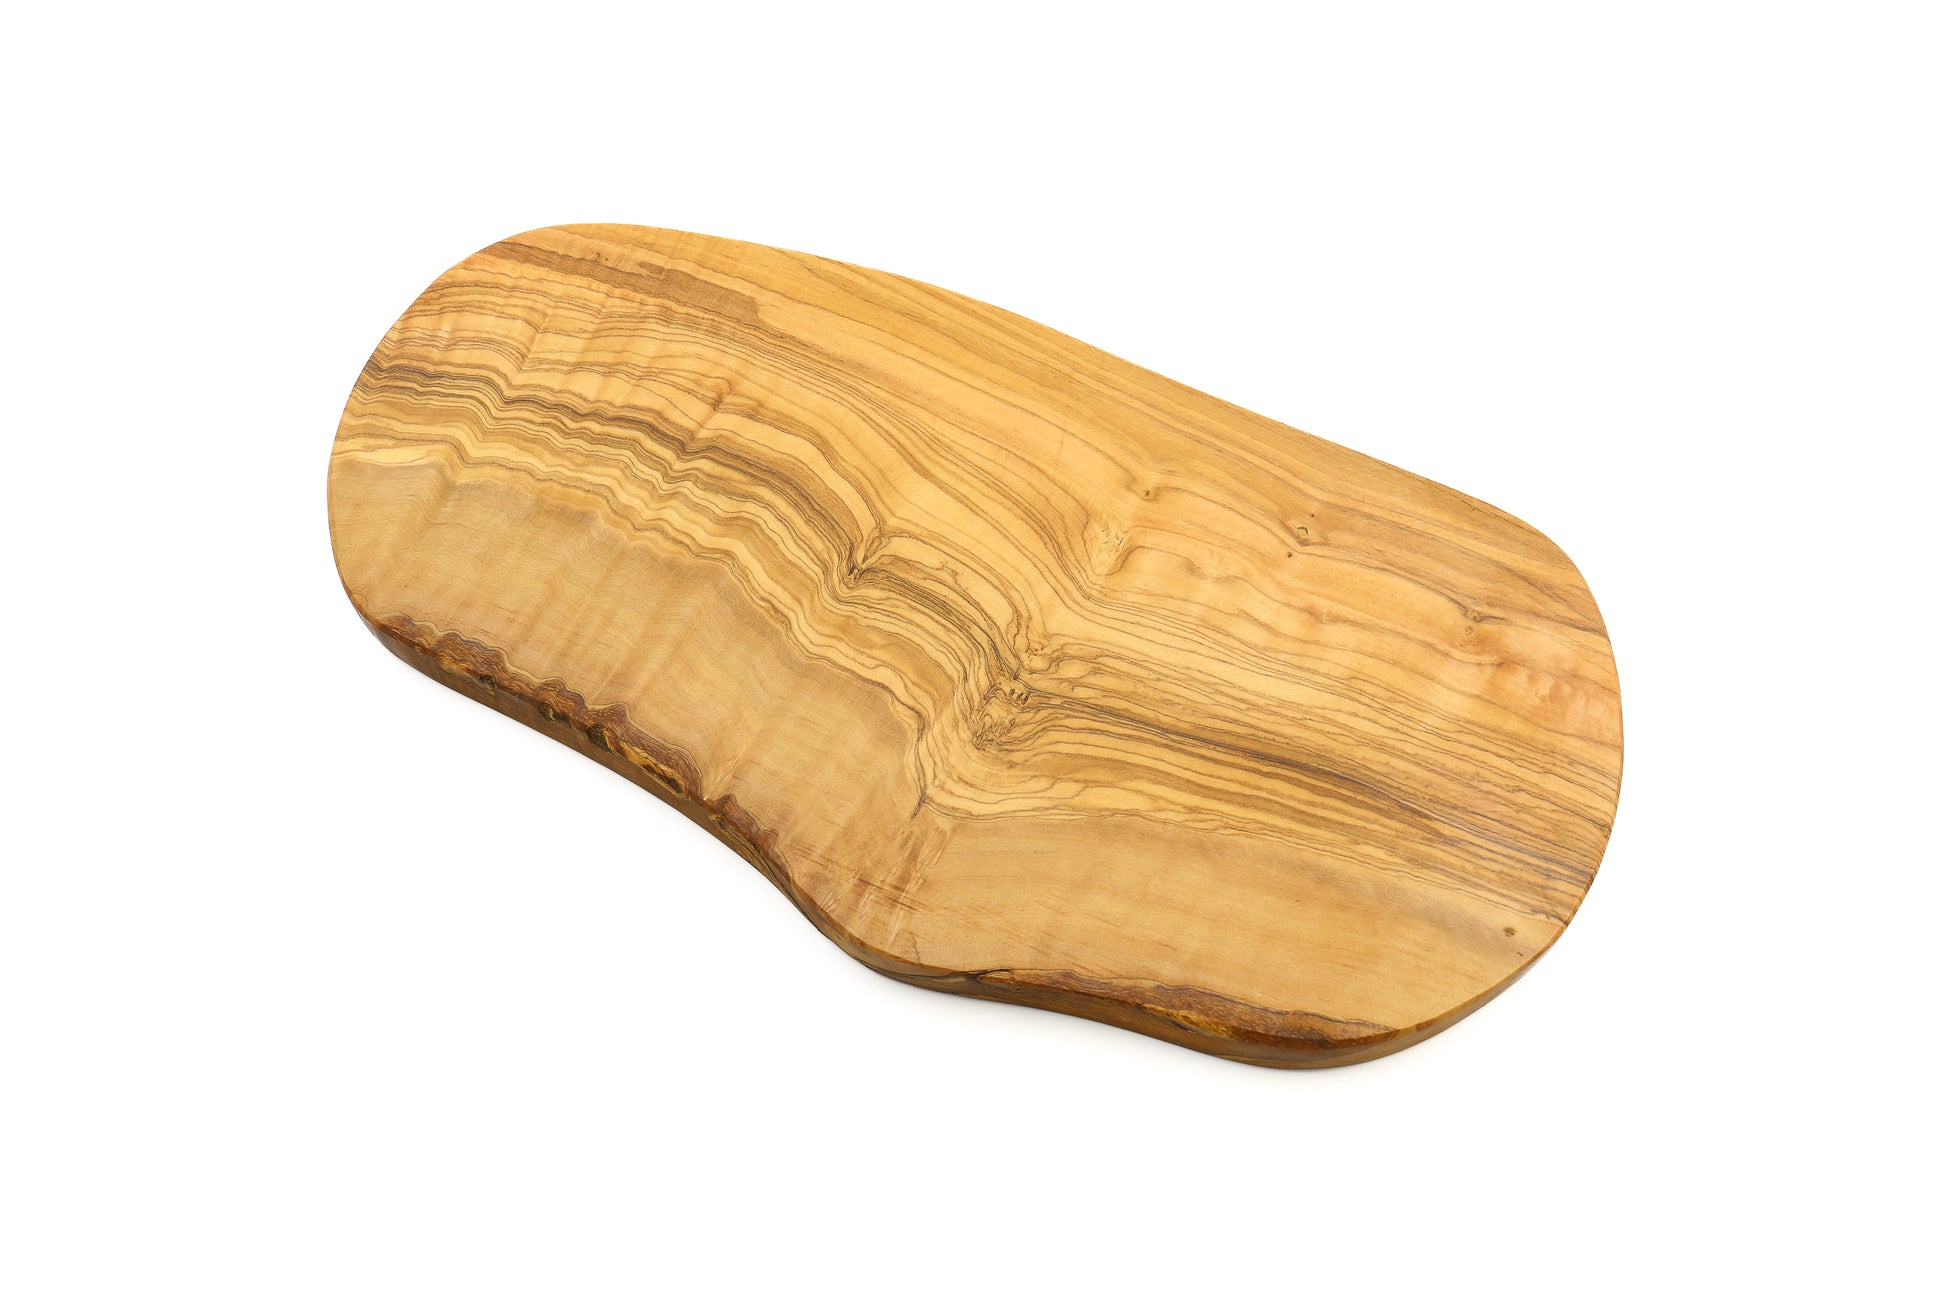 Unique olive wood kitchen accessory for a distinctive culinary experience